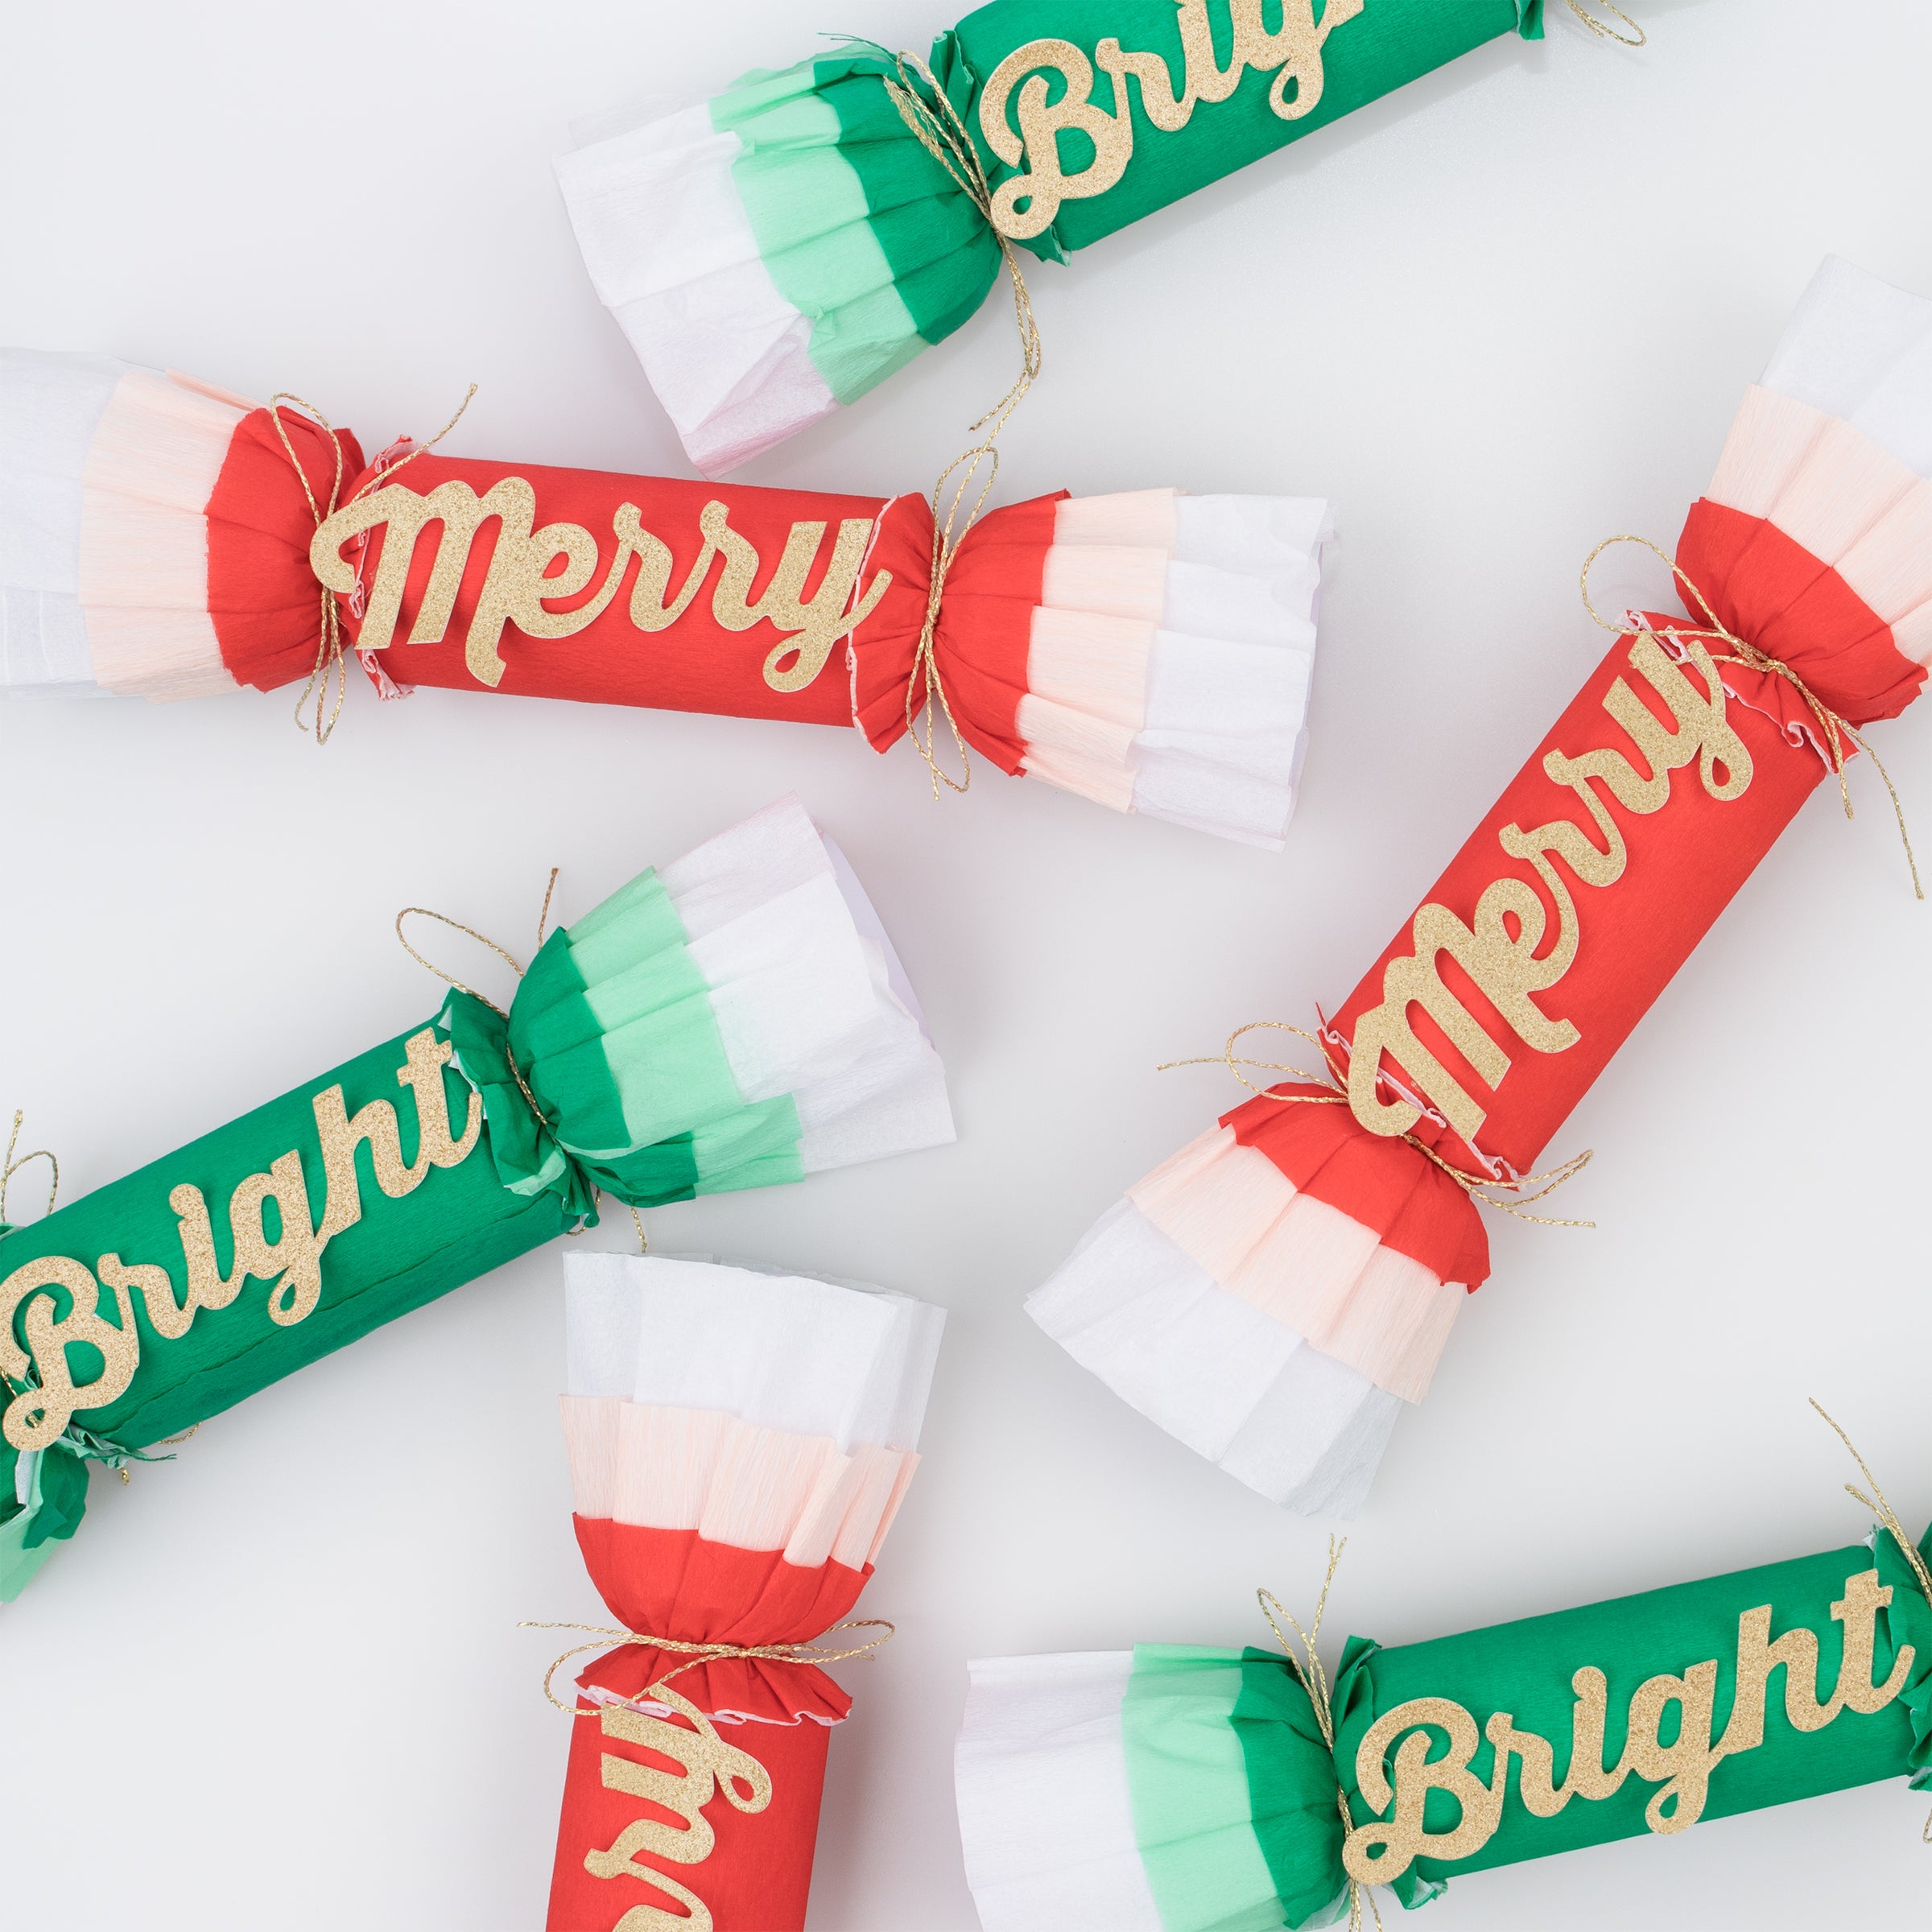 Our party crackers, with on-trend designs, are perfect for a traditional Christmas dinner.